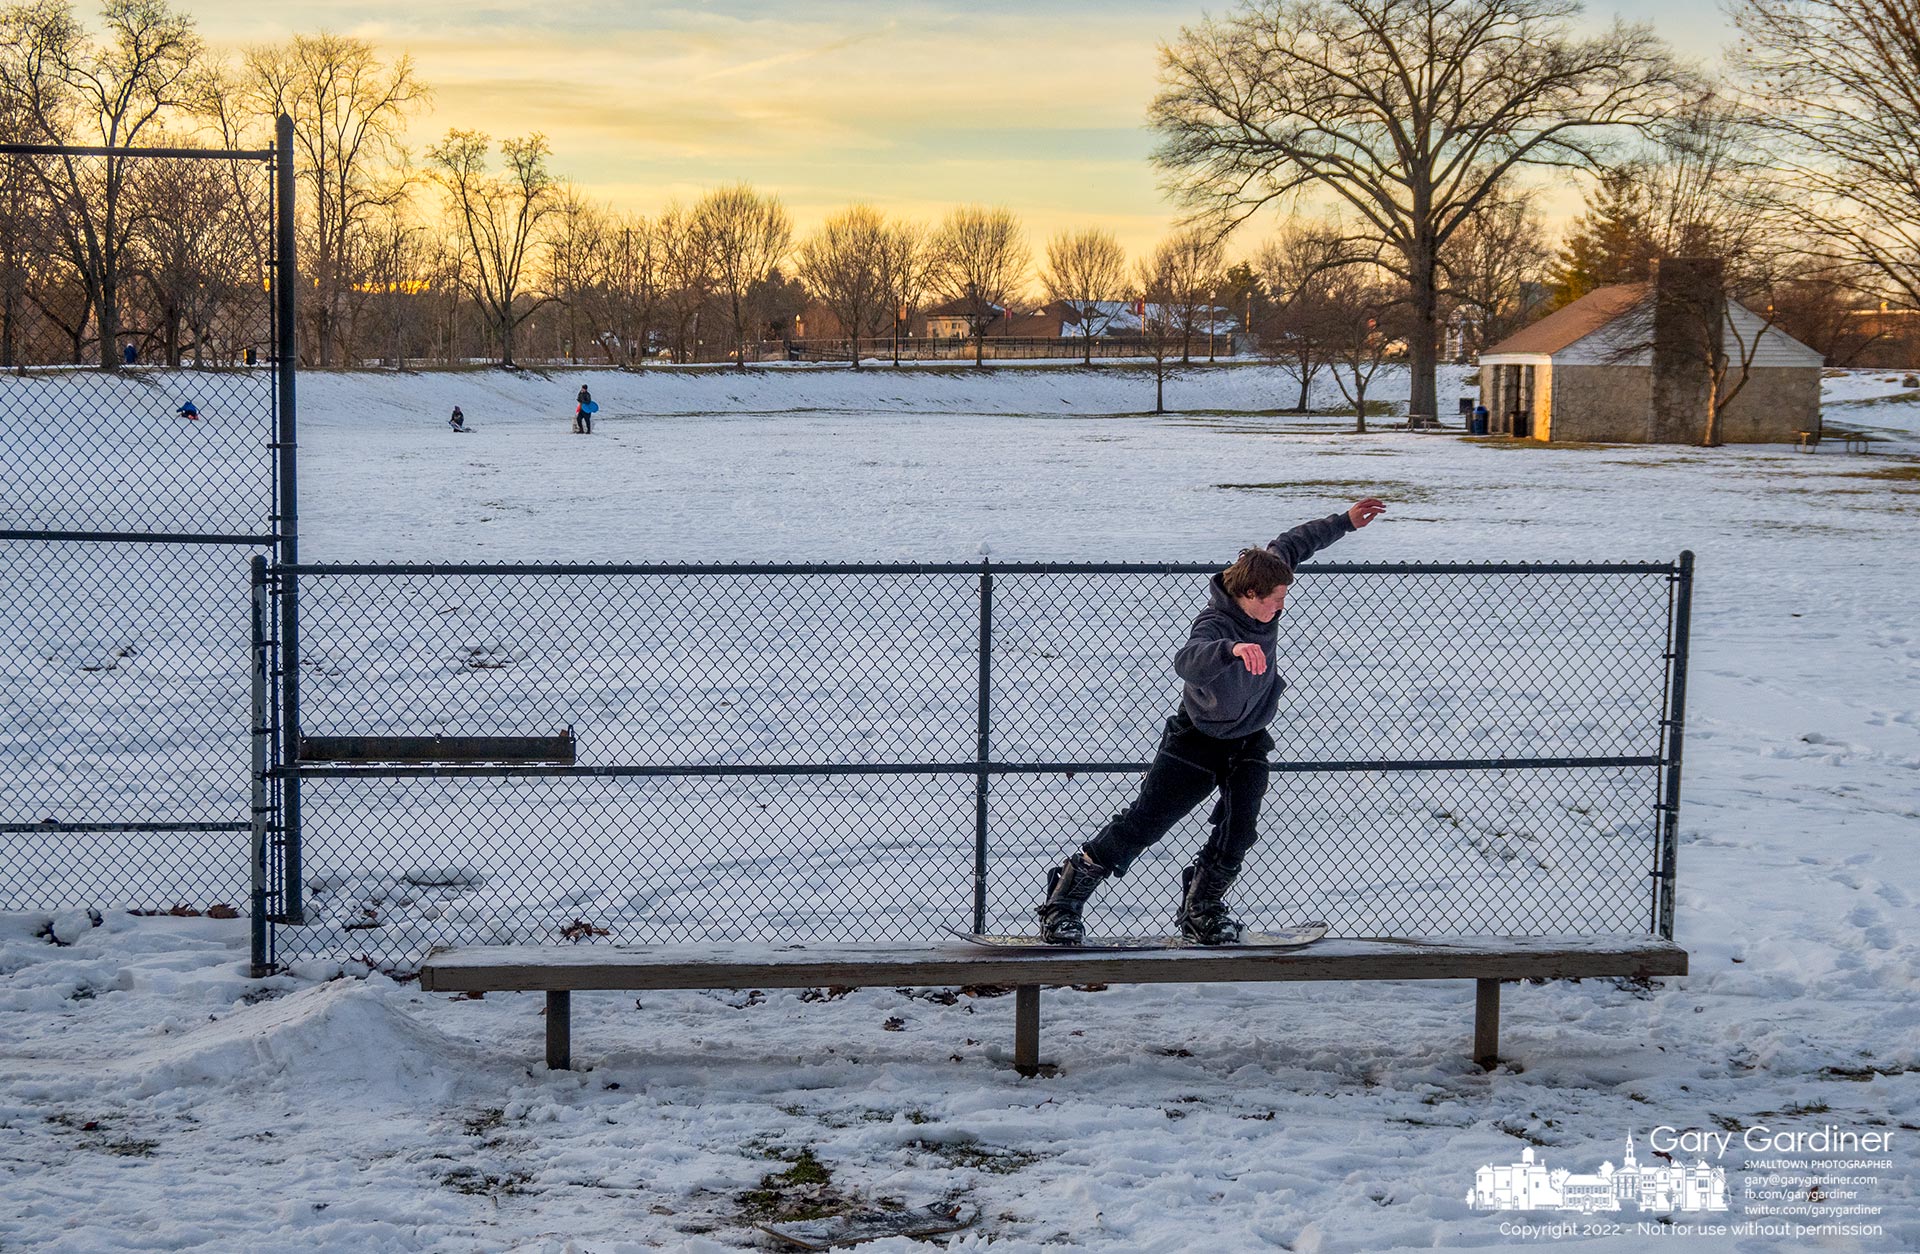 A snowboarder steadies himself as he nears the end of a ride across the player's bench at Alum Creek Park where he and another boarder built ice ramps to propel themselves across the bench usually empty this time of the year. My Final Photo for December 28, 2022.